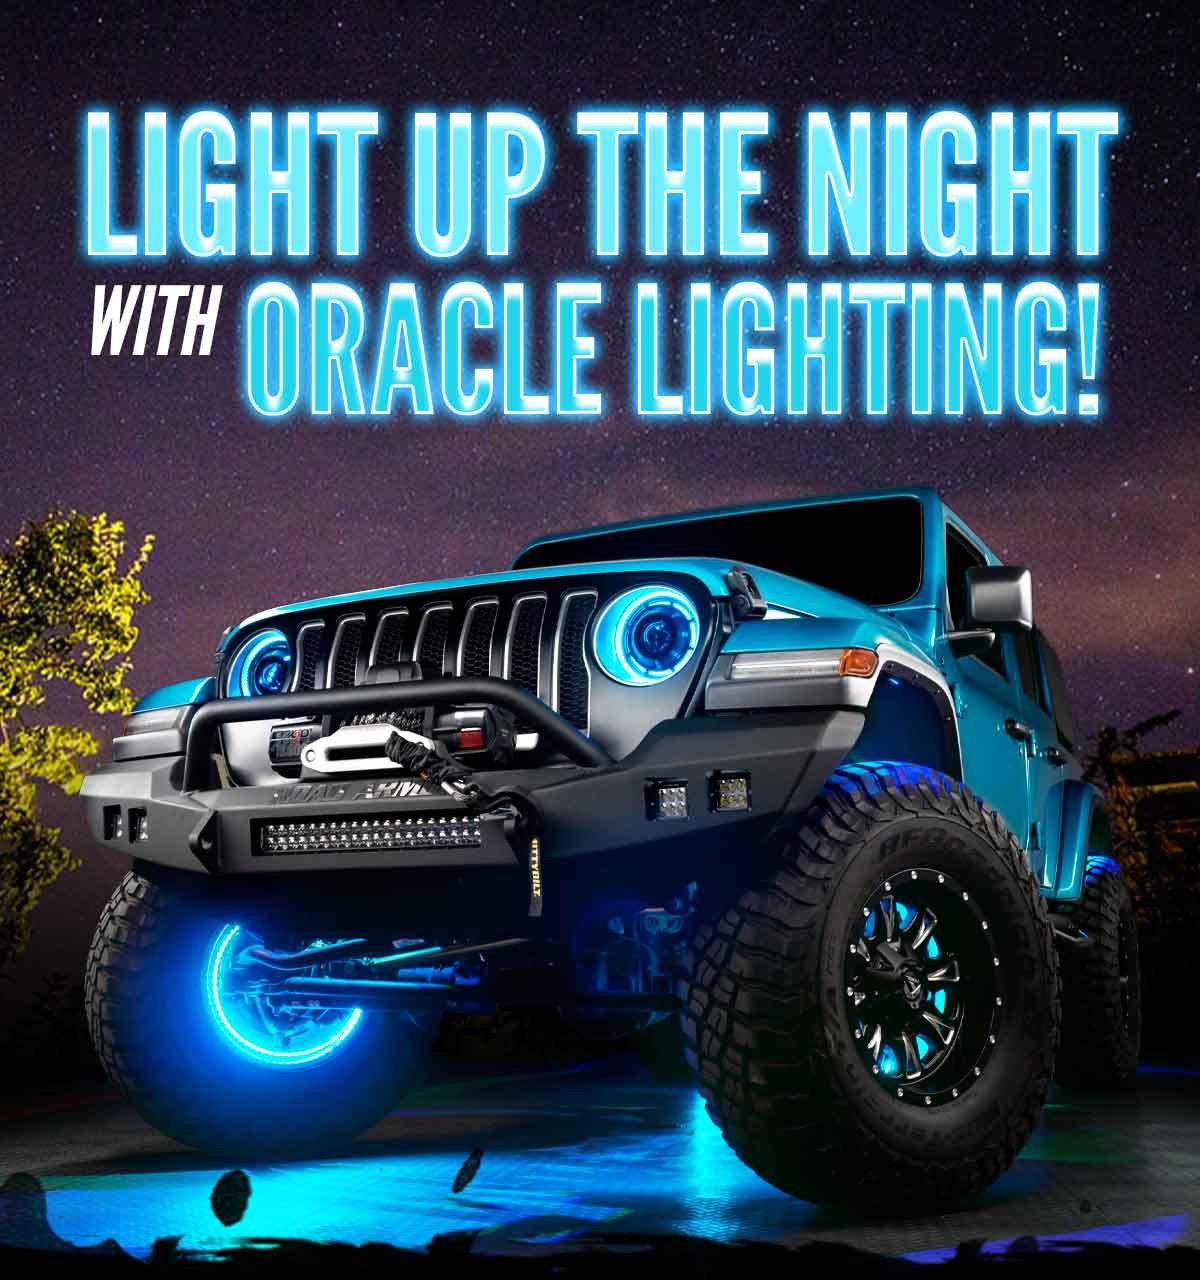 Light Up The Night With Oracle Lighting!